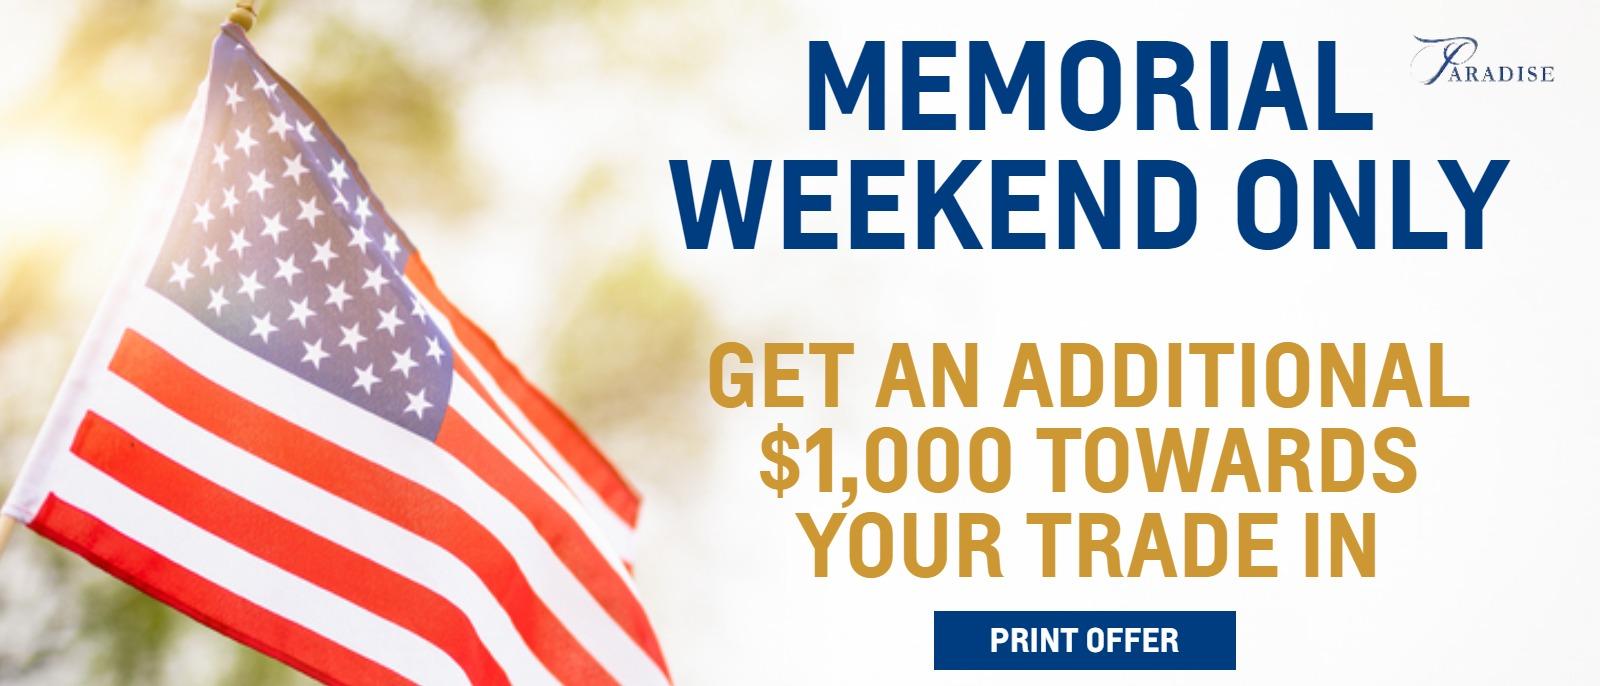 Memorial WEEKEND ONLY
Get An Additional $1,000 Towards Your Trade In